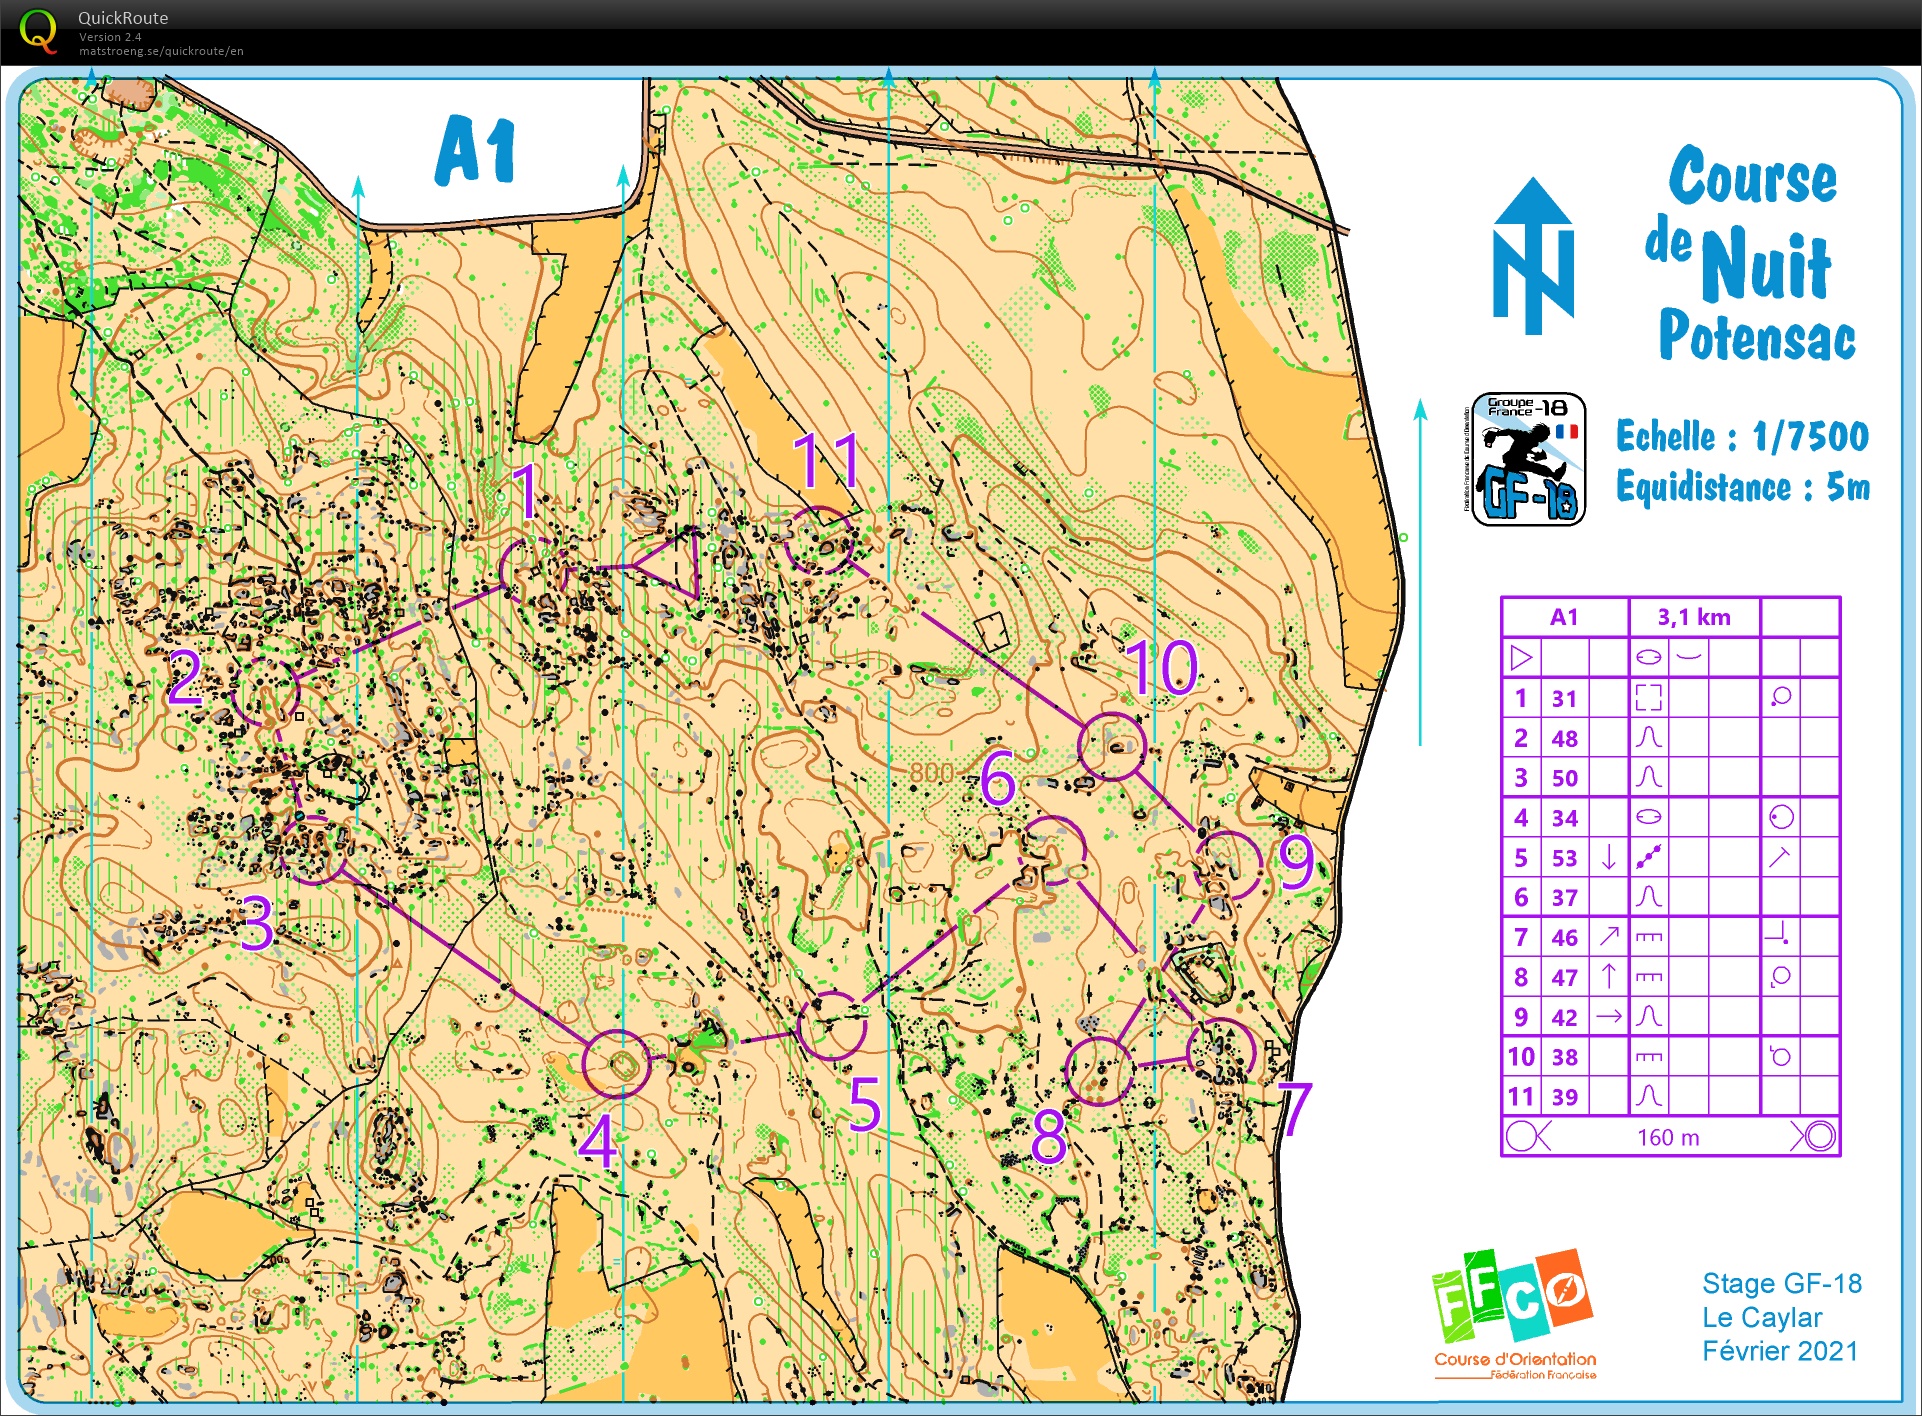 Stage GF-18 Larzac (E5) CO nuit - A1 (07-02-2021)